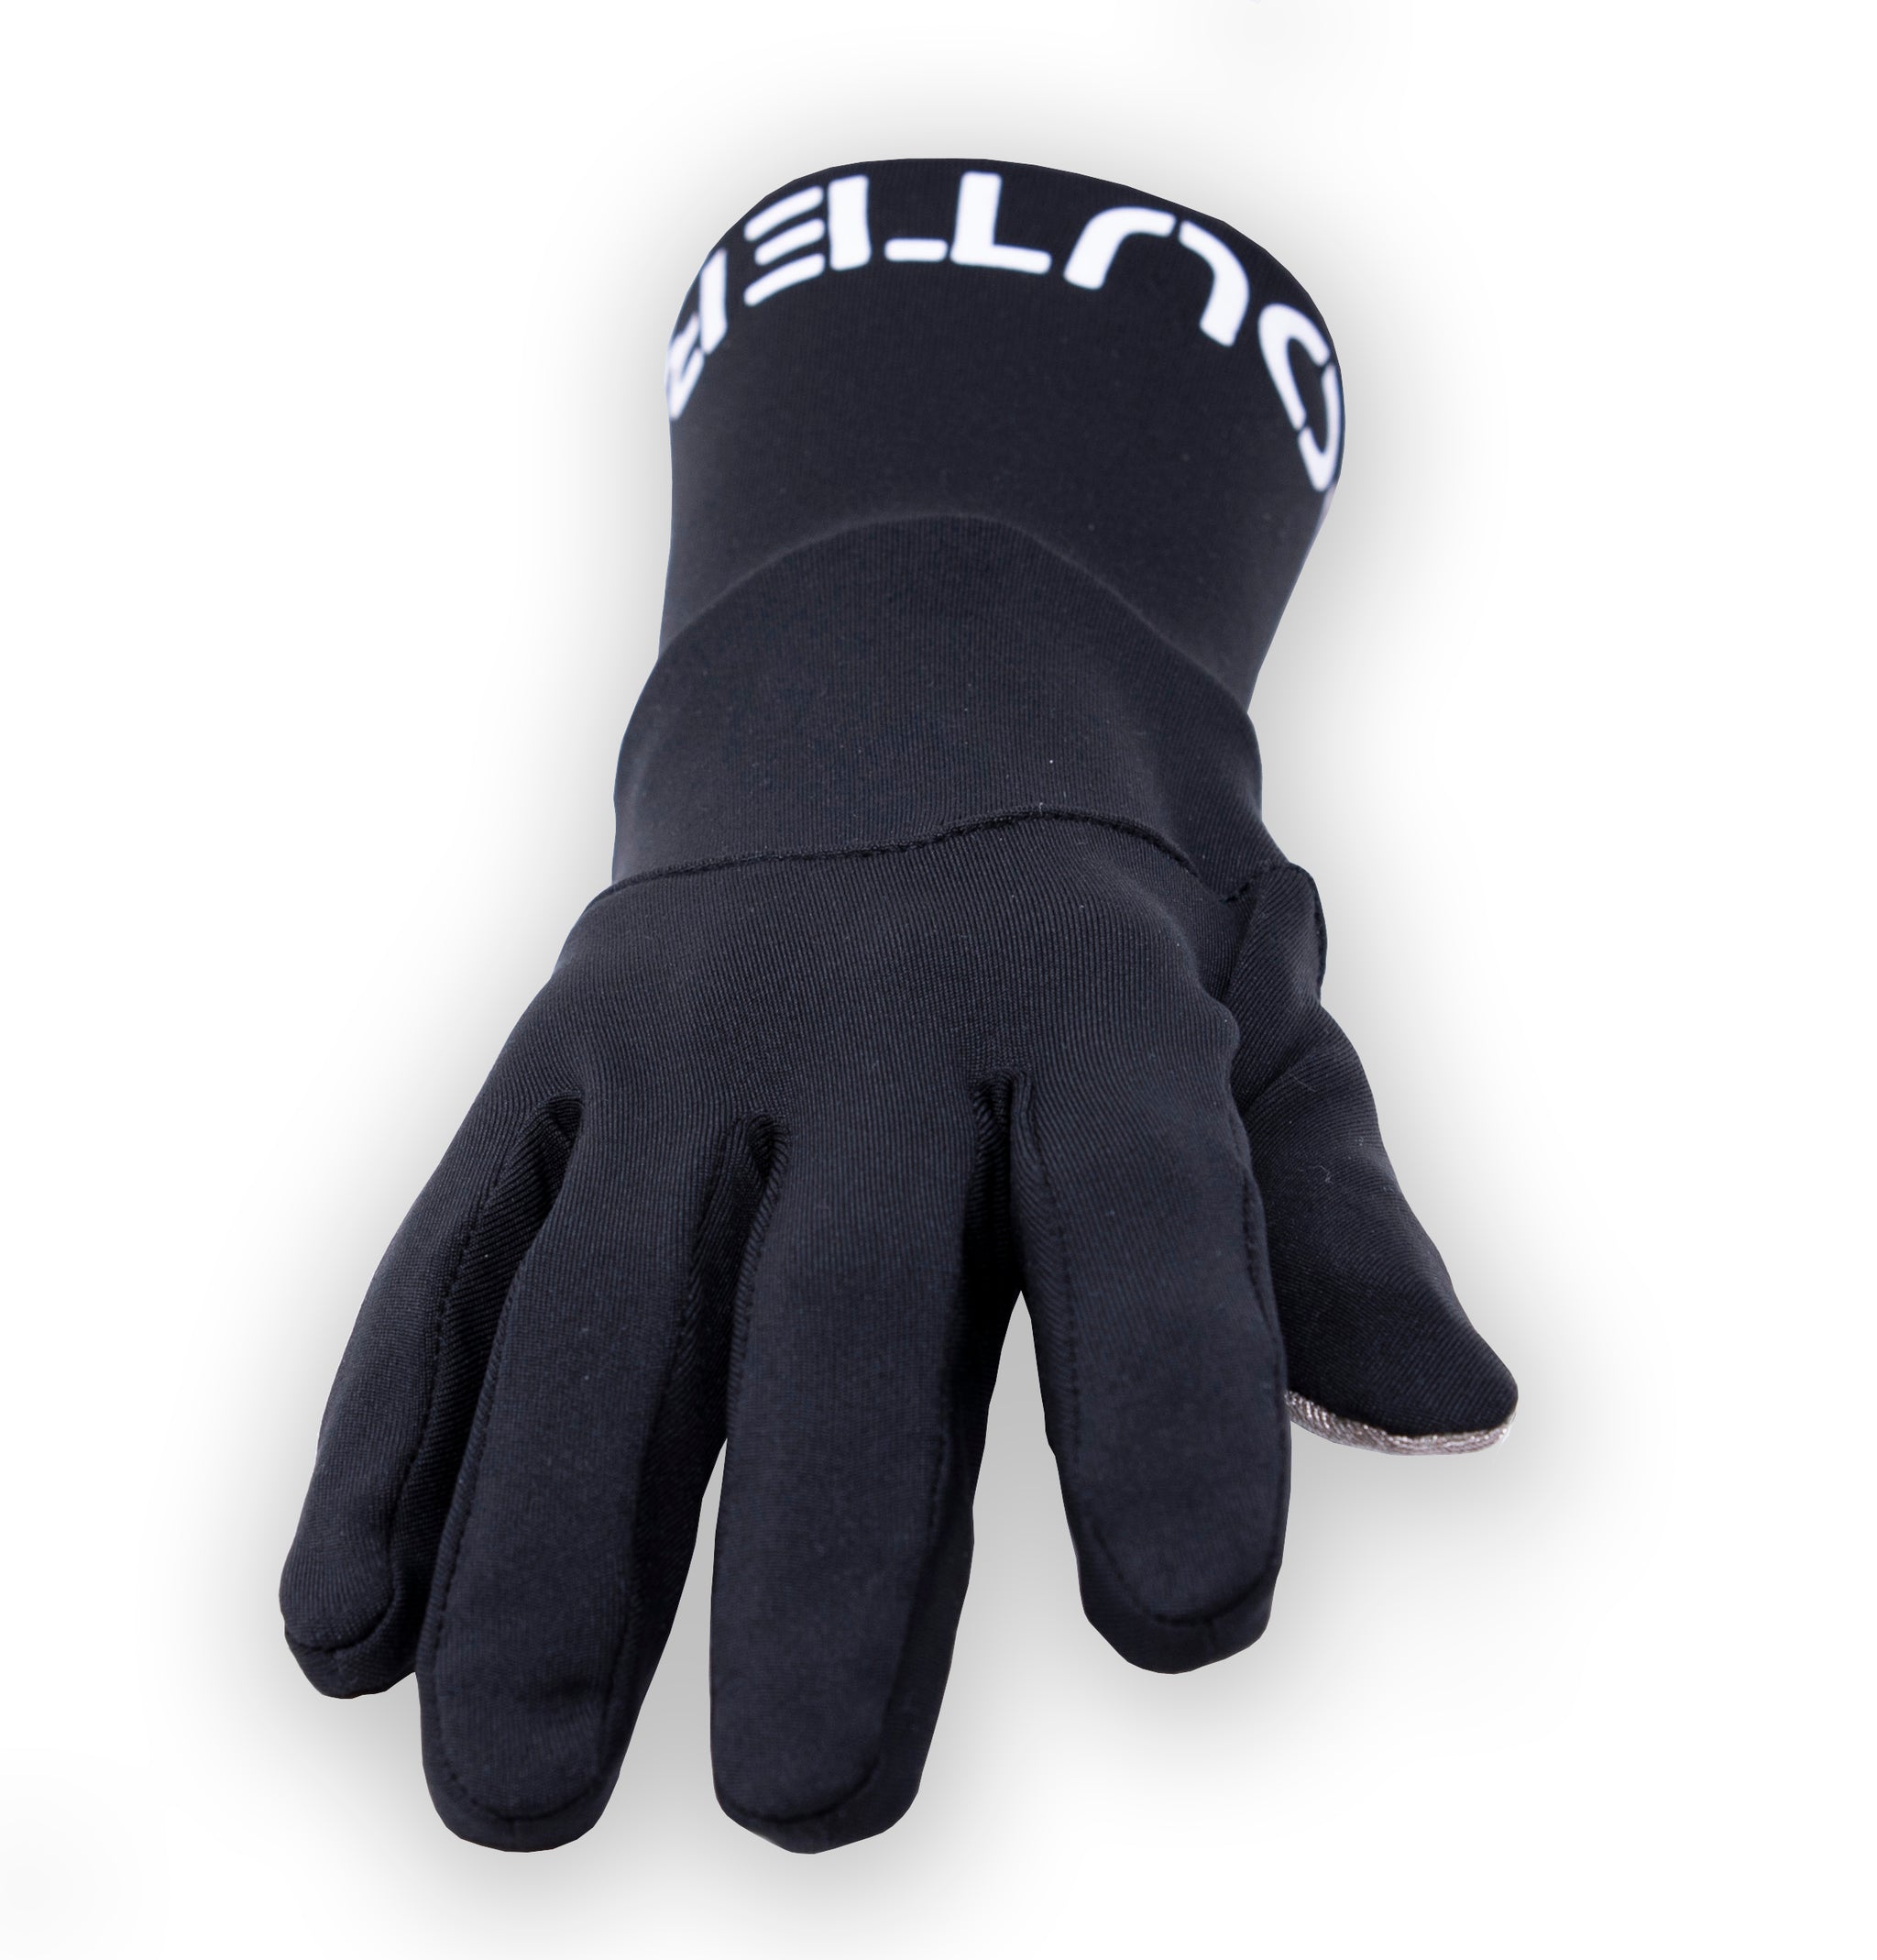 ChillOUT Gloves - AllOuter